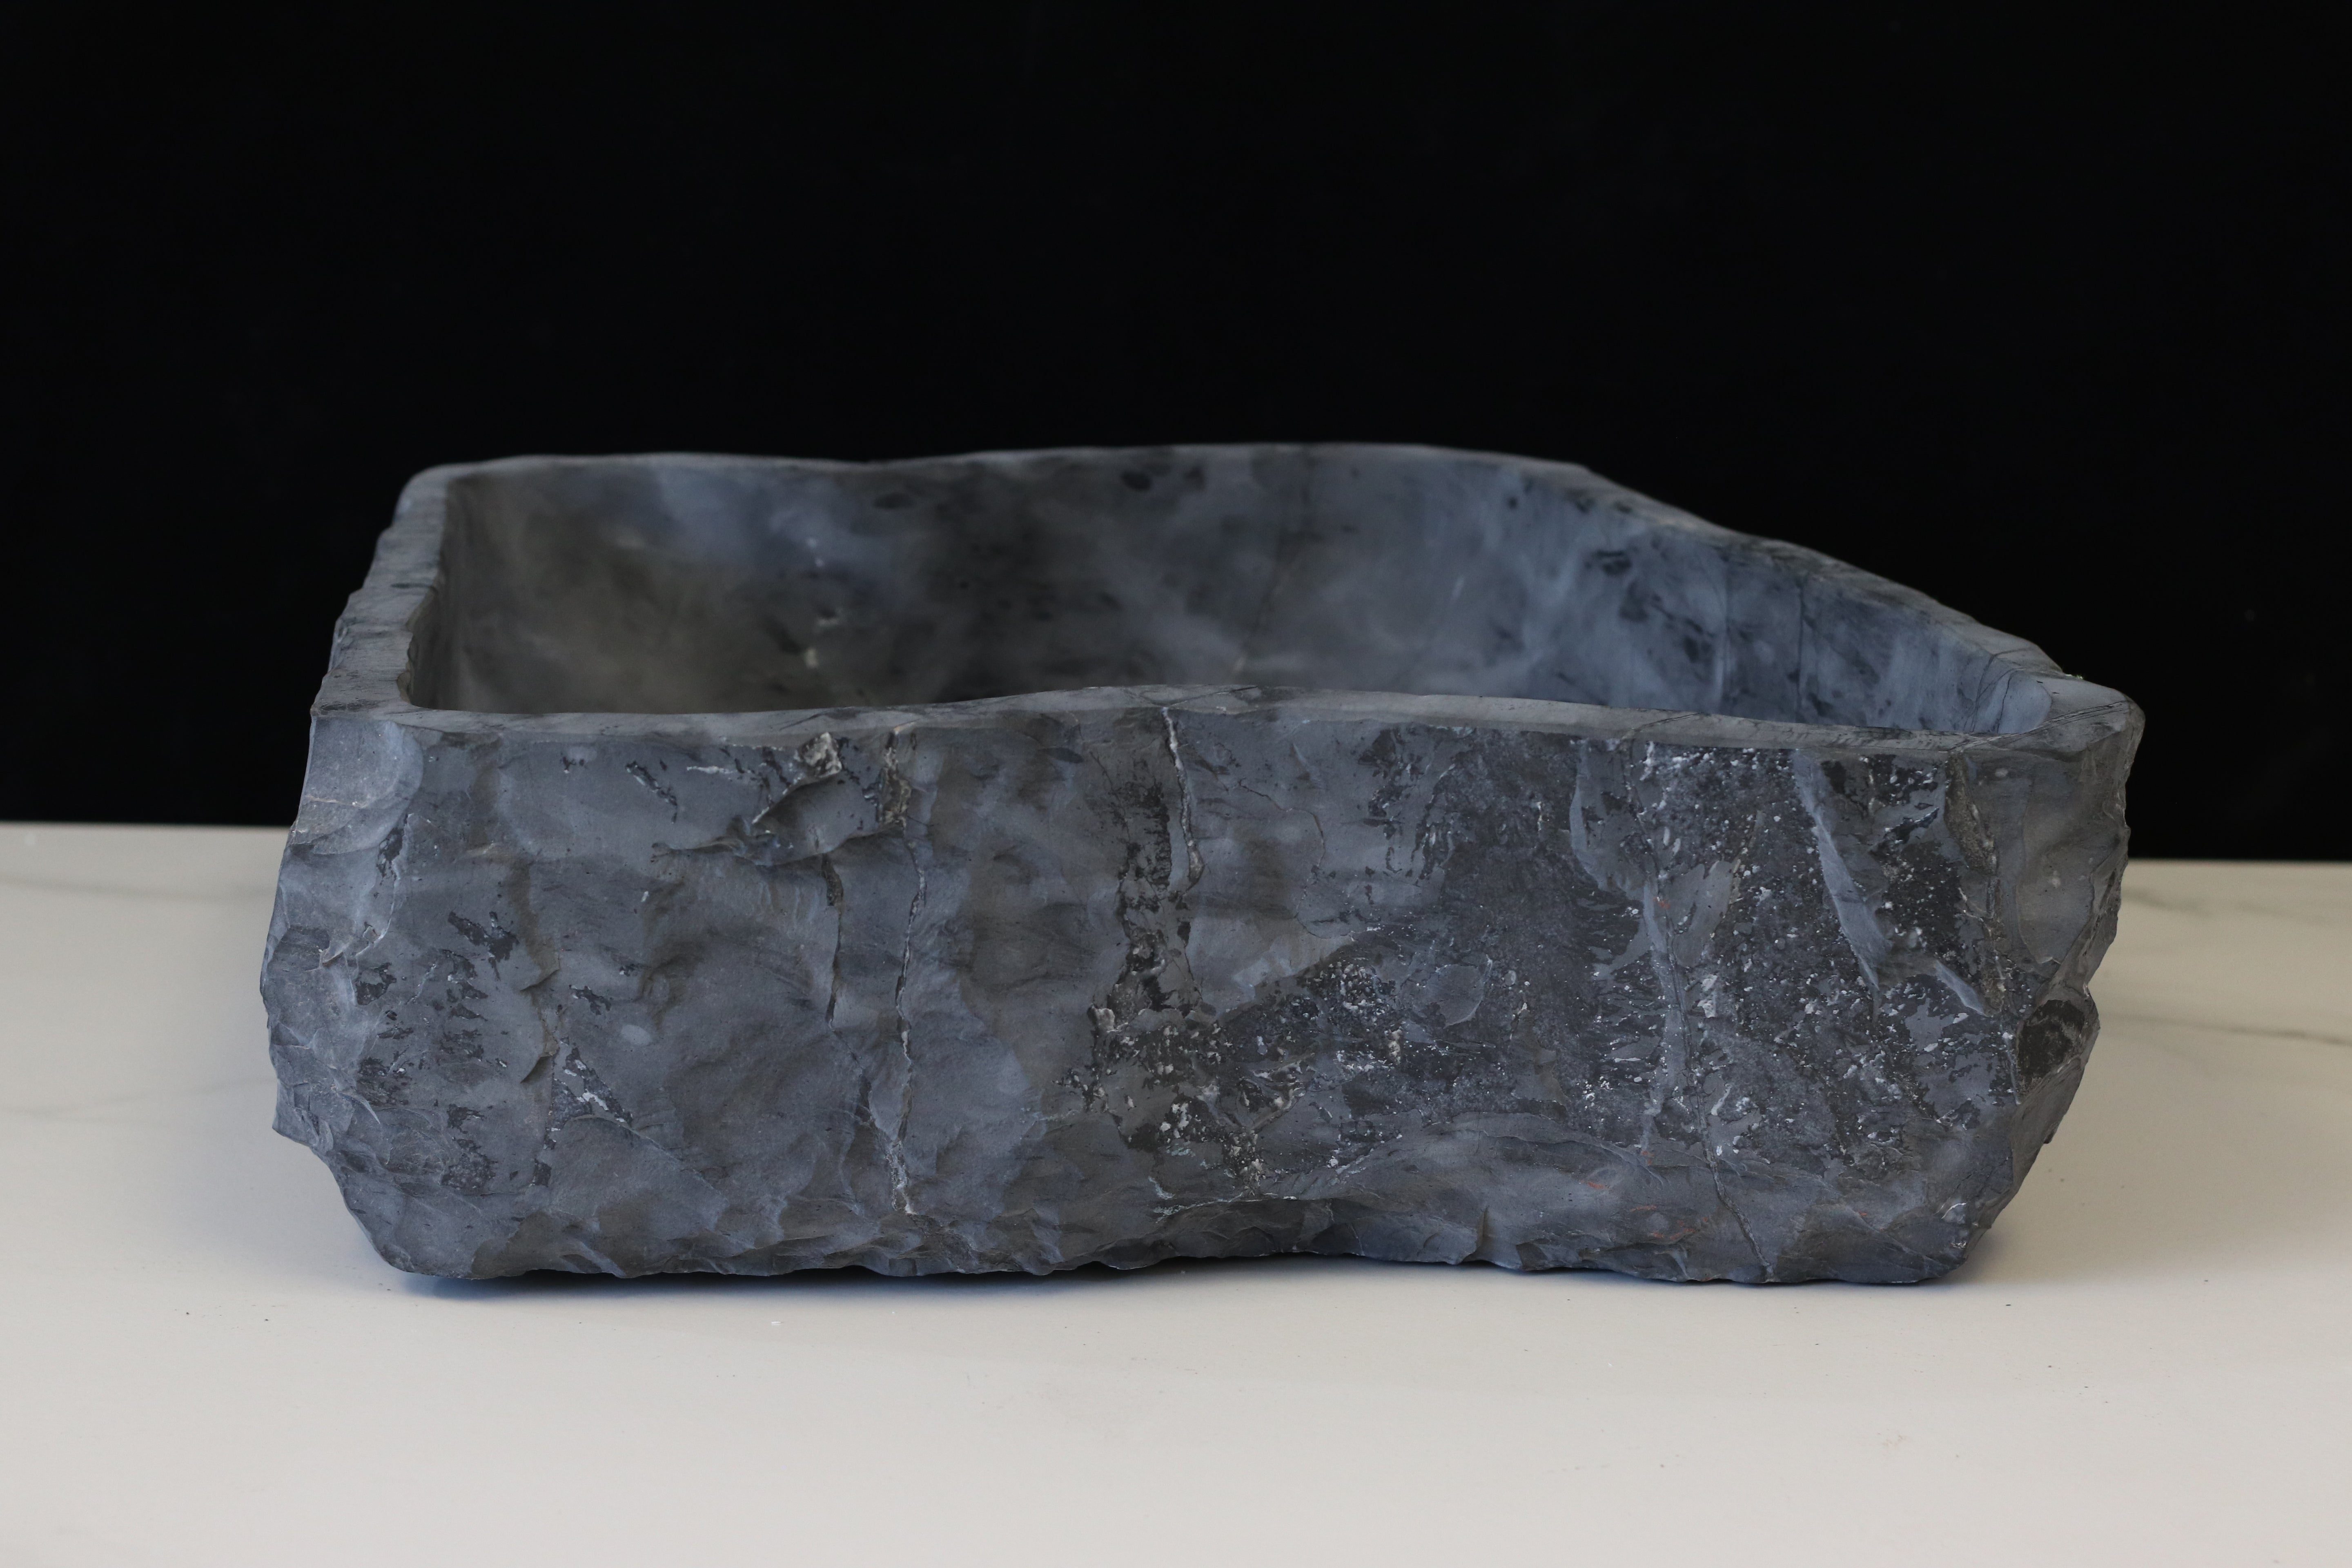 Black and Gray Onyx Stone  Bathroom Vessel Sink. Epoxy Sealant is available with fast shipping. Standard drain size. A beautiful work of rustic art. Handmade. Buy Now at www.felipeandgrace.com